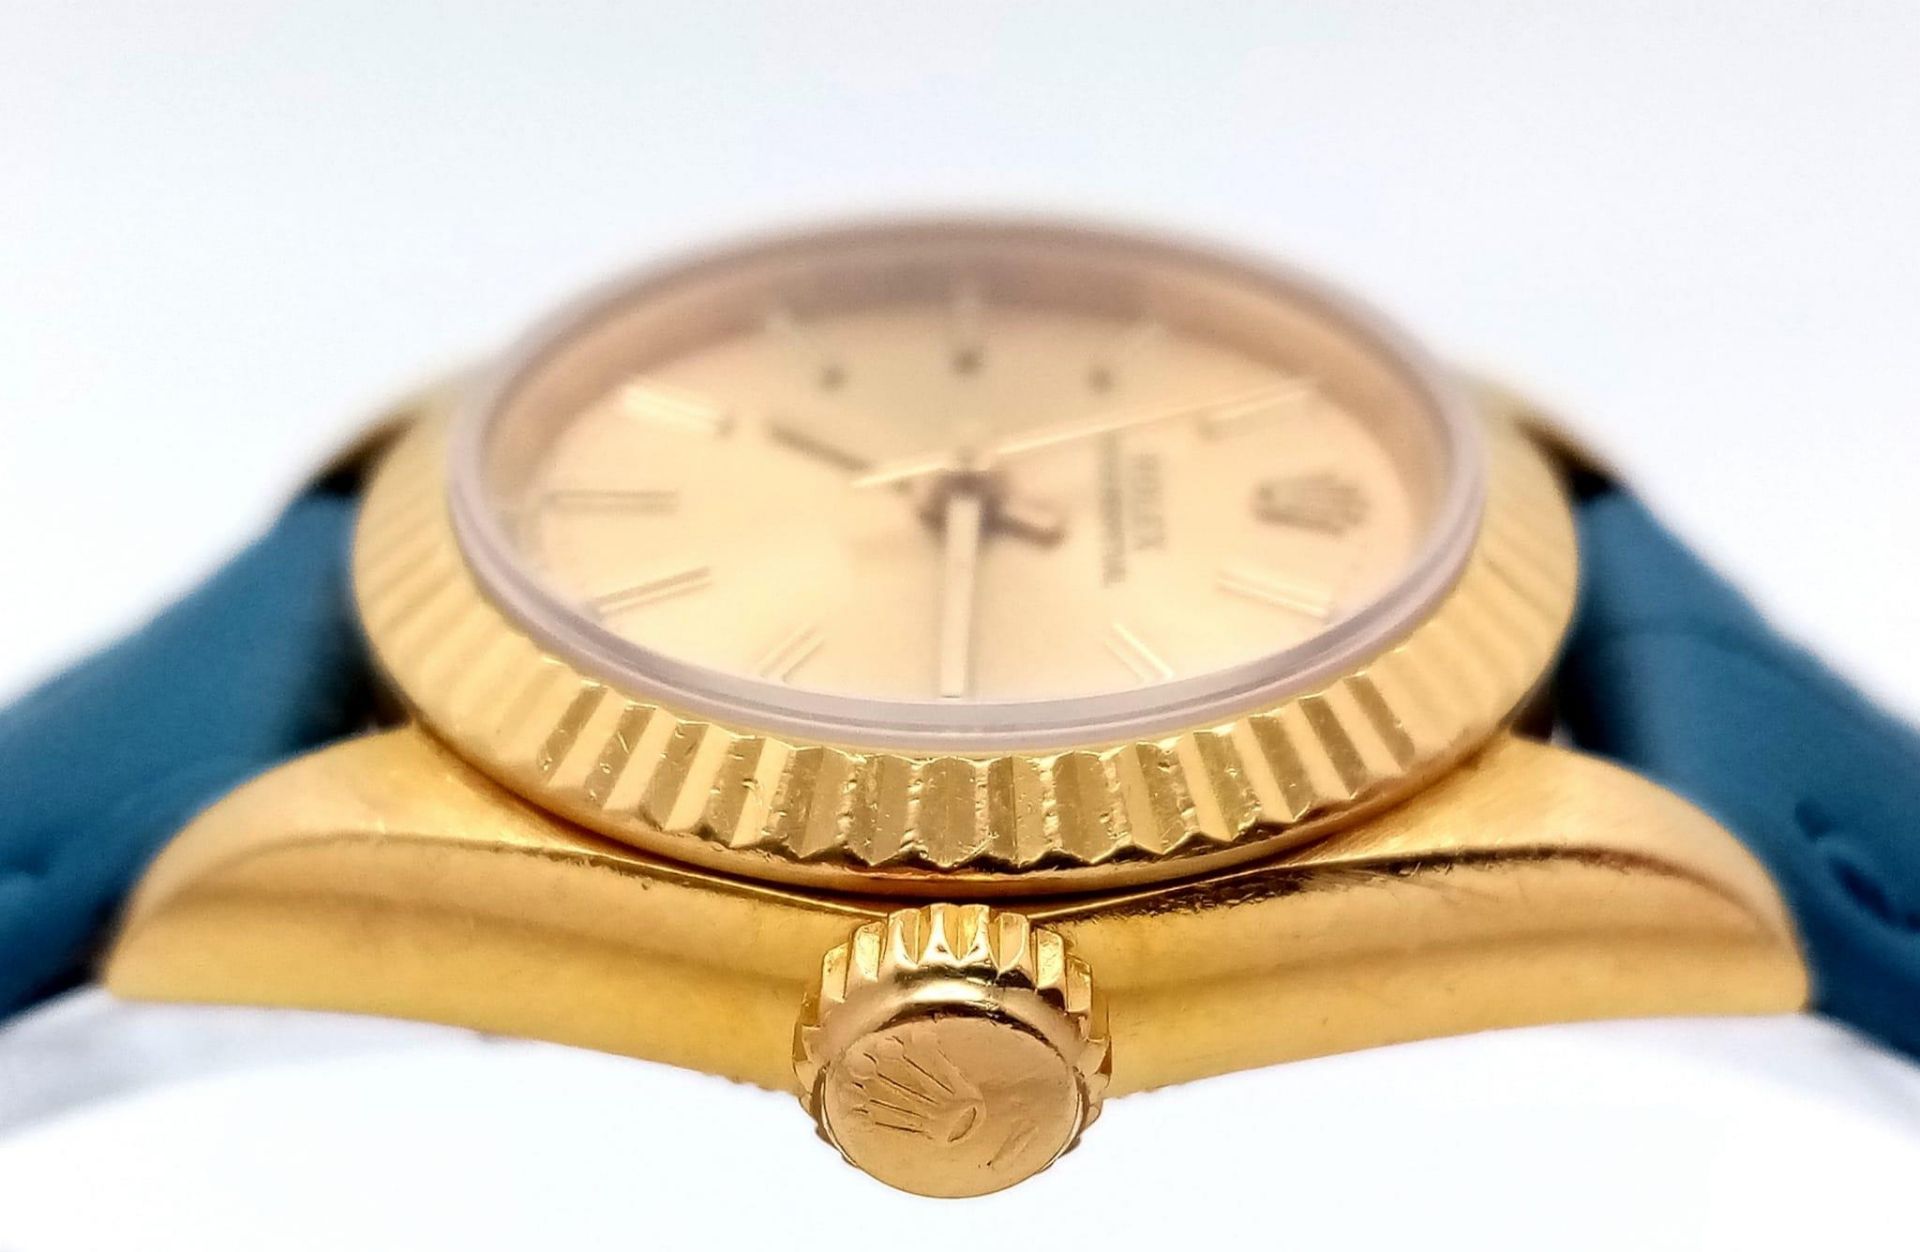 An 18k Gold Rolex Oyster Perpetual Ladies Watch. Blue leather strap. 18k gold case - 25mm. Gold tone - Image 5 of 10